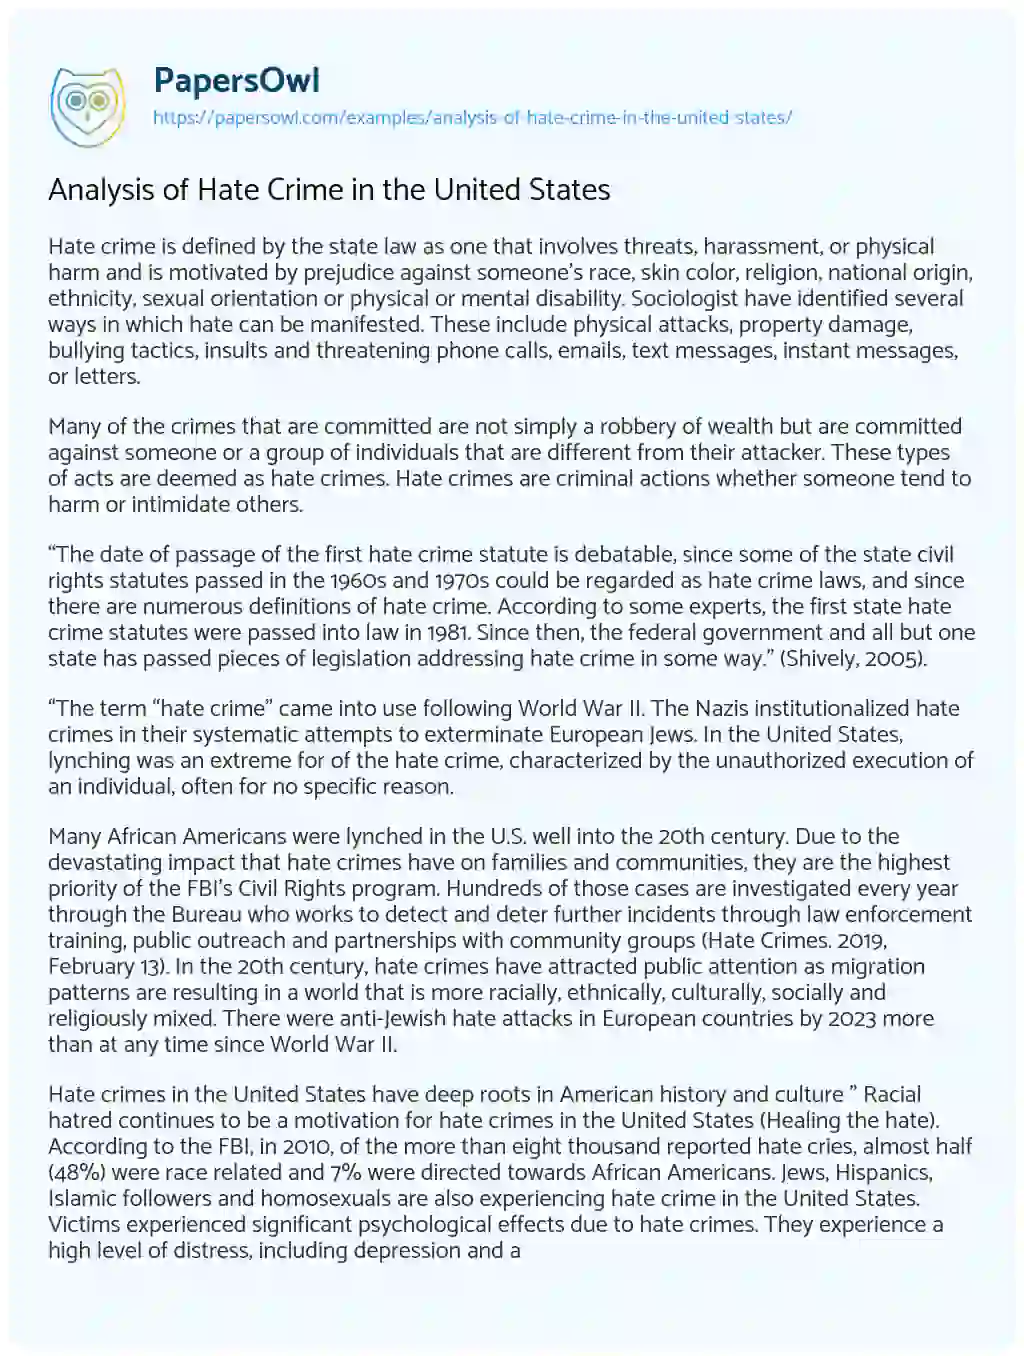 Essay on Analysis of Hate Crime in the United States